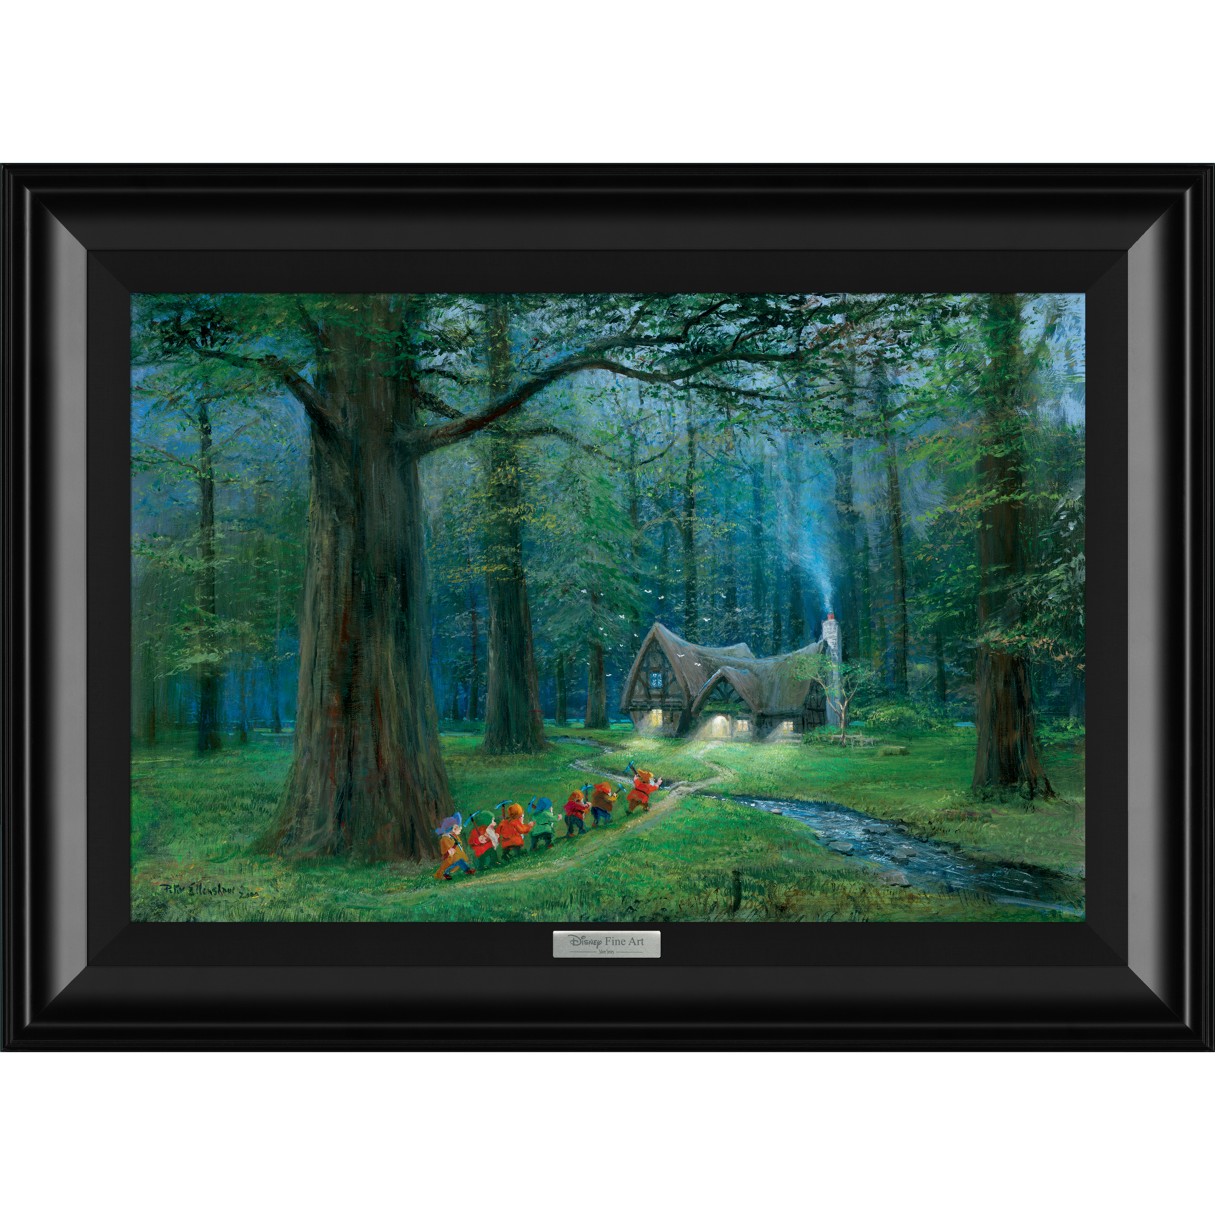 Snow White and the Seven Dwarfs ''Off to Home We Go'' by Peter Ellenshaw Framed Canvas Artwork – Limited Edition